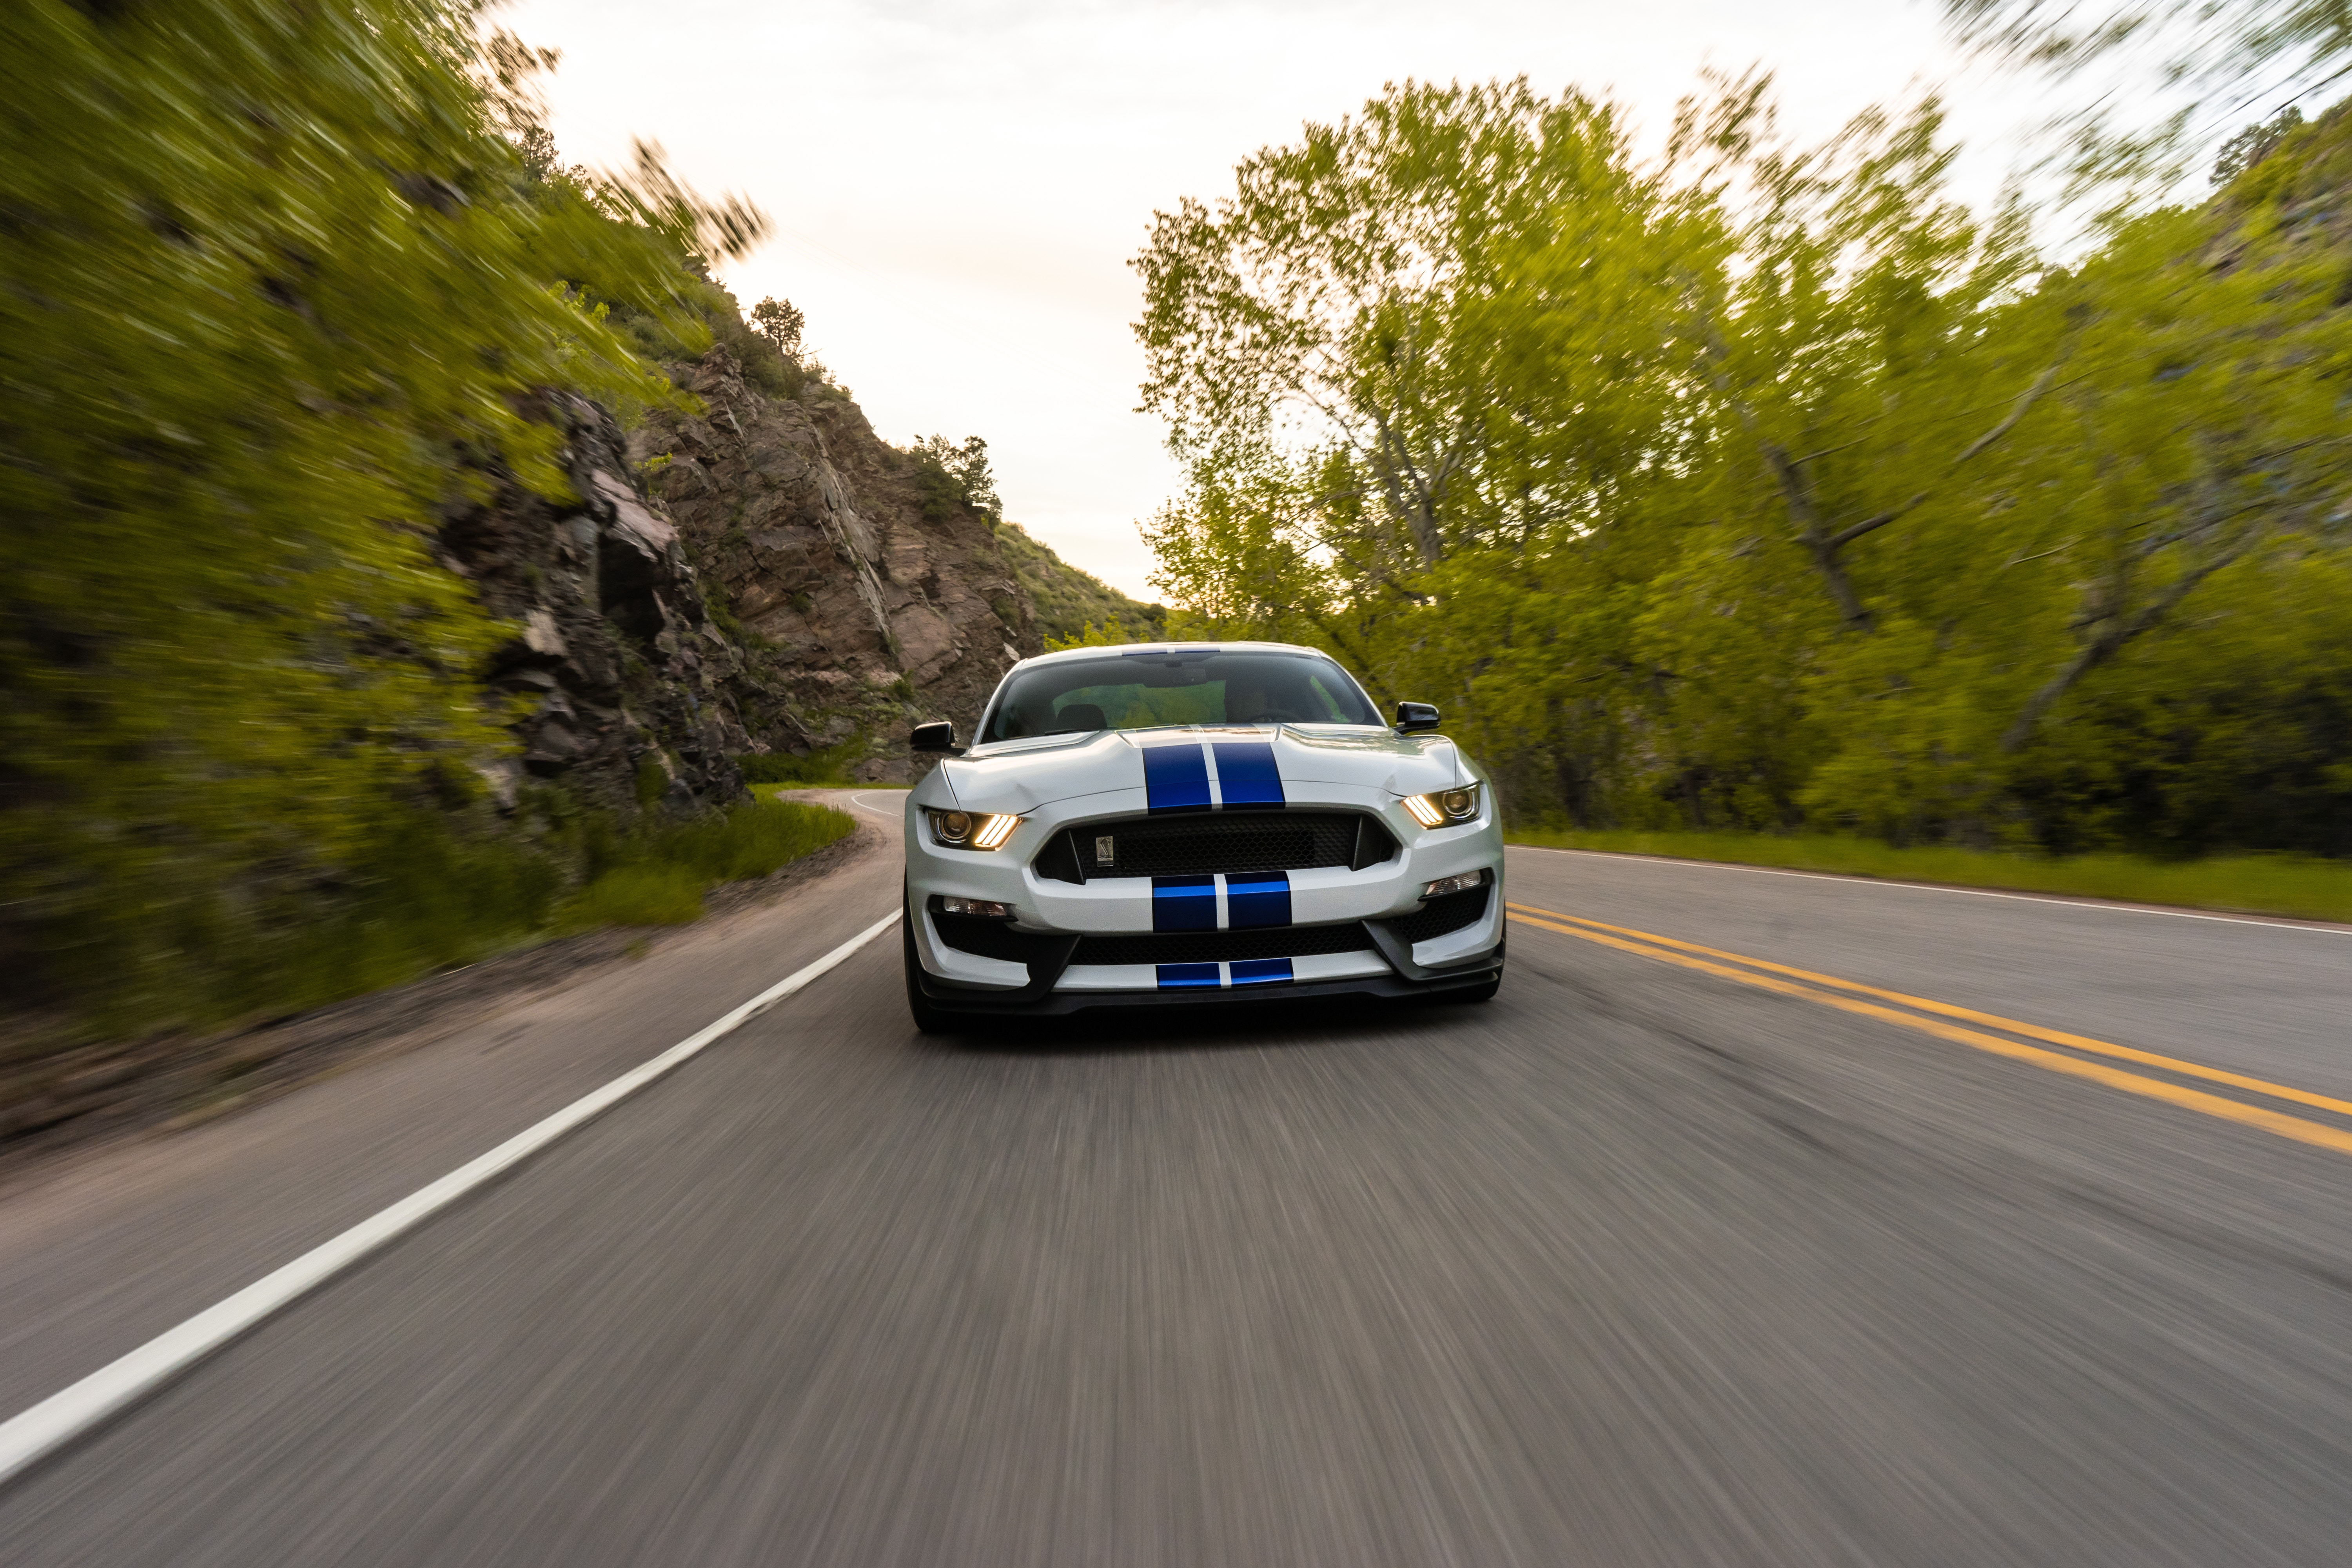 cars, car, sports car, road, speed, ford mustang gt350, sports, ford, machine